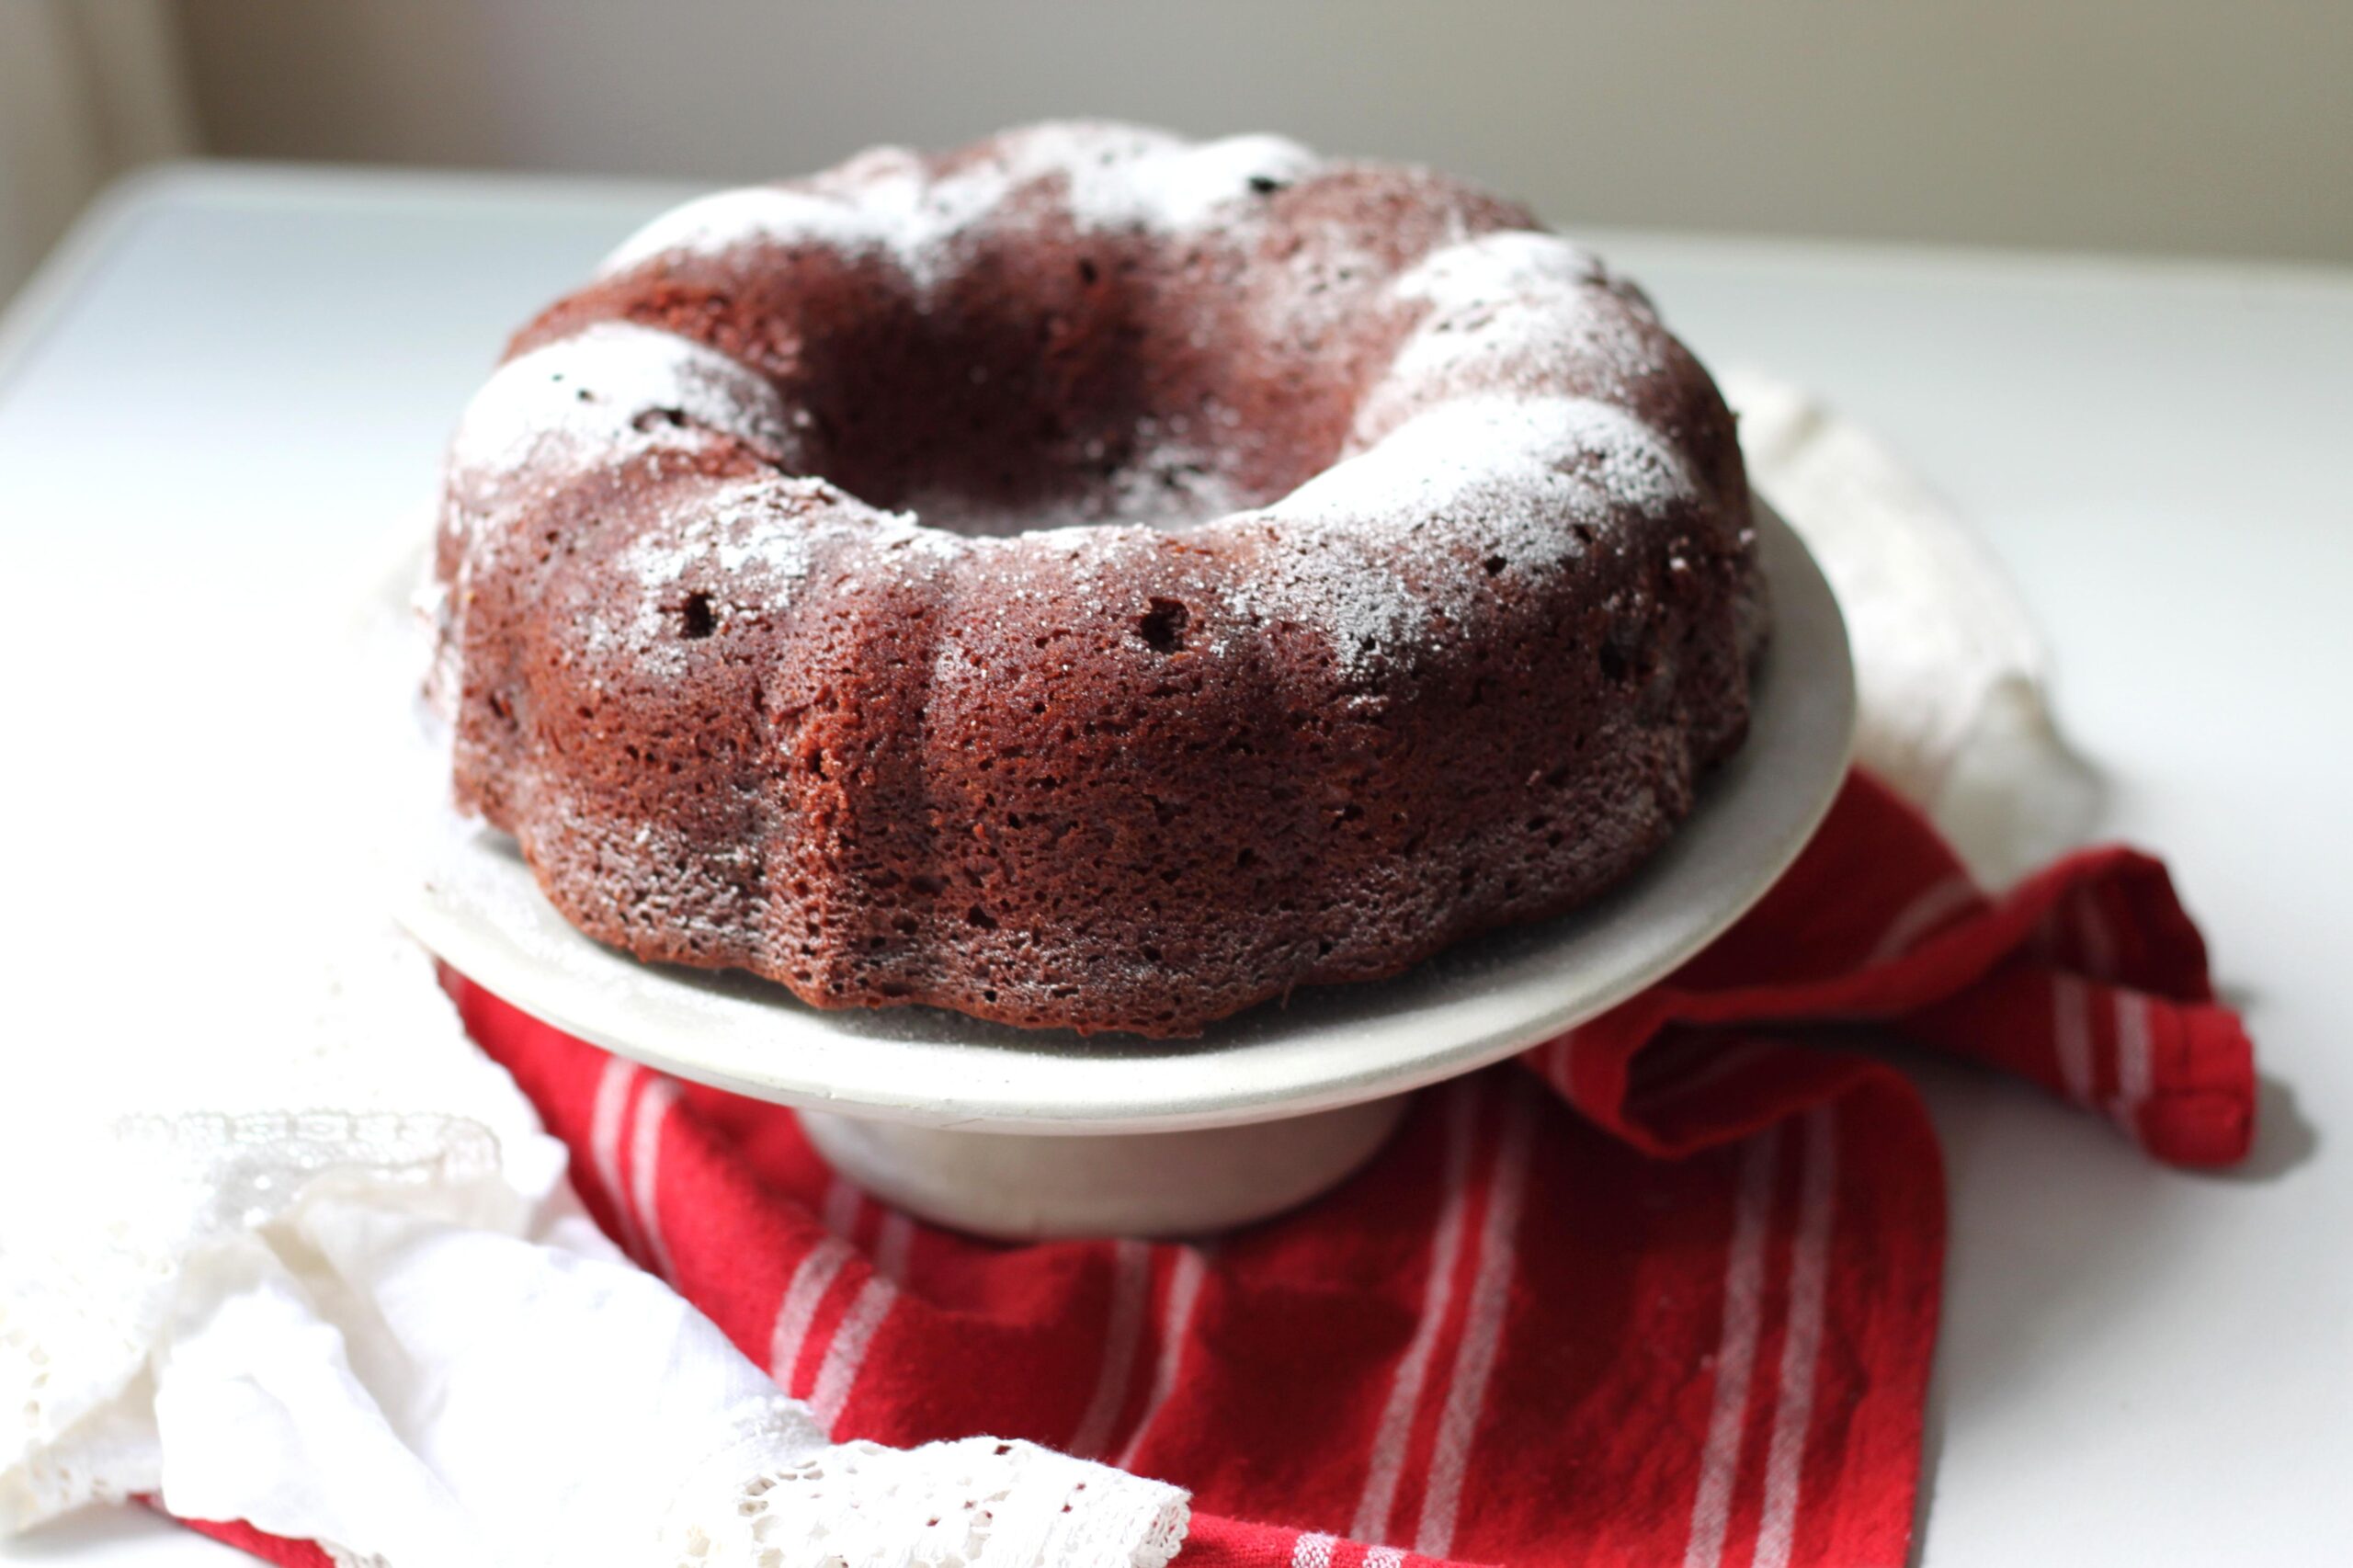  Soft, fluffy, and incredibly delicious, this Red Velvet Pecan Praline Pound Cake is the perfect indulgent dessert!